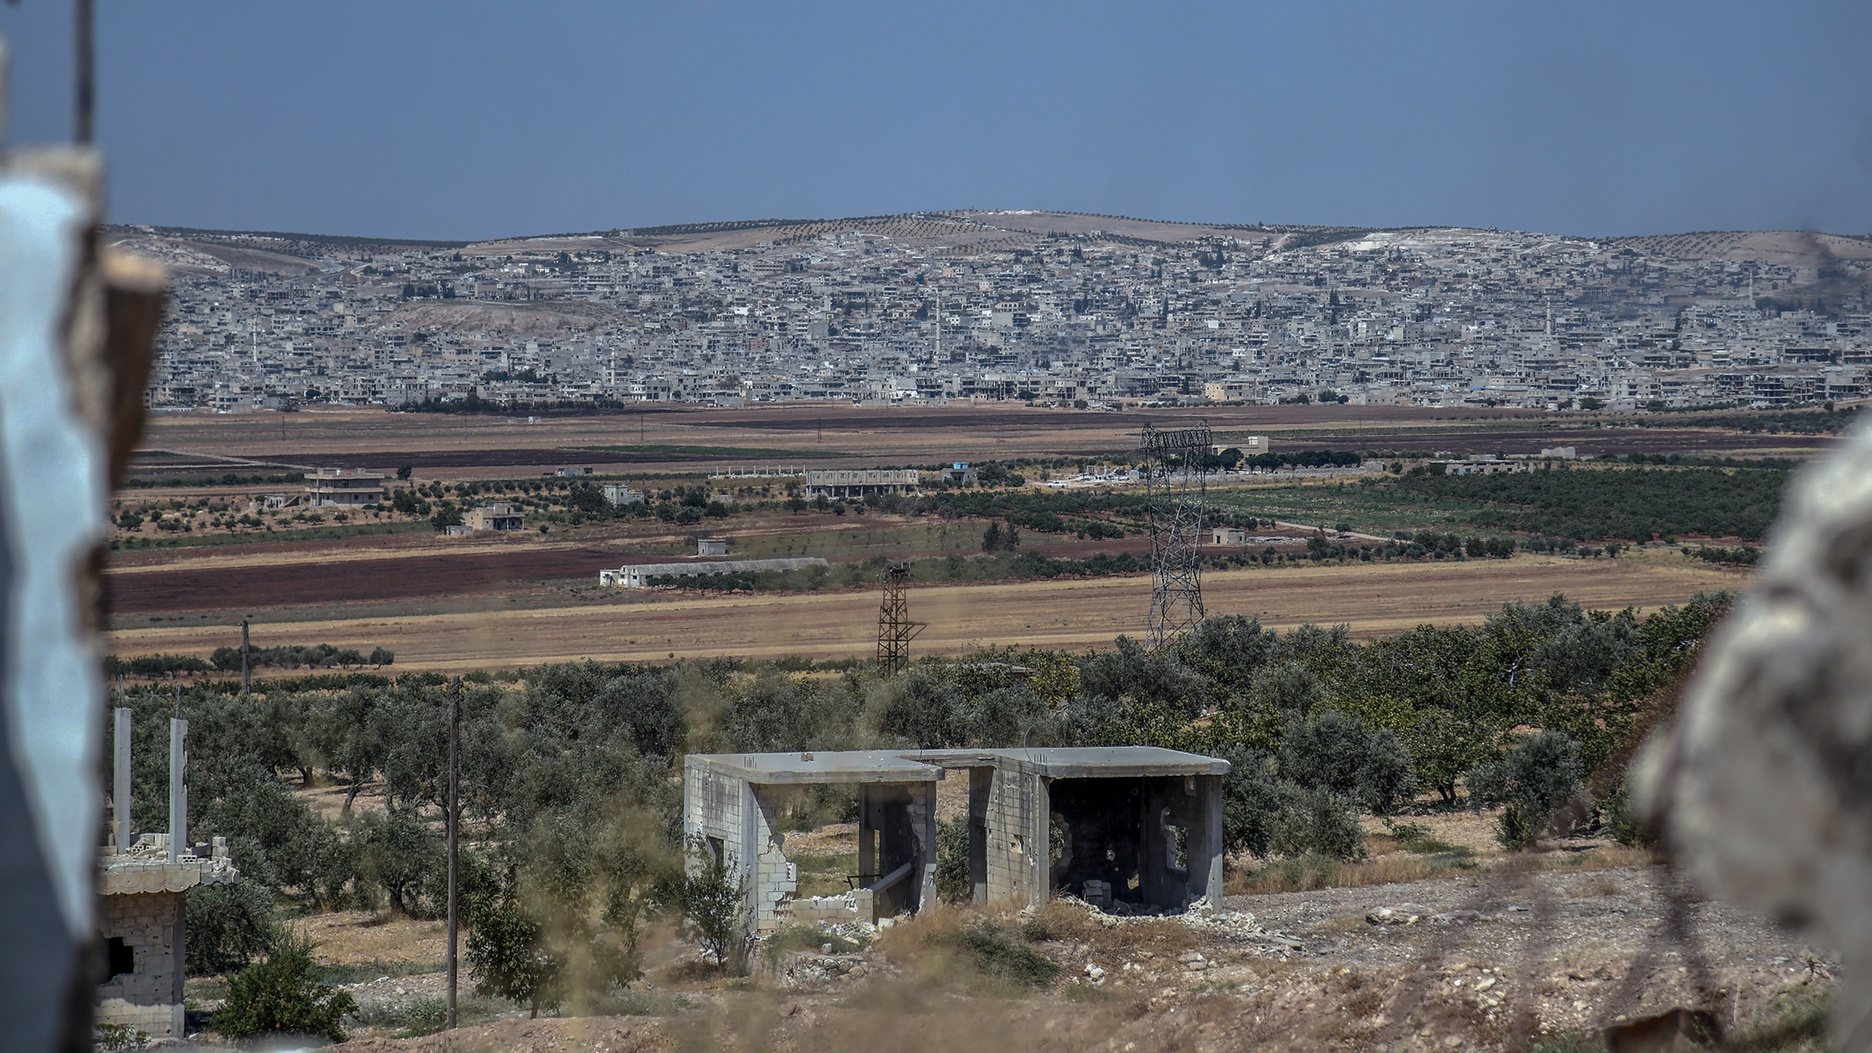 epa07790198 A handout photo made available by the official Syrian Arab News Agency (SANA) shows a general view of damaged buildings in Khan Sheikhoun city area in Idleb southern countryside, Syria, 23 August 2019 (Issued on 24 August 2019). According to SANA, Syrian Arab Army&#039;s units uncovered a network of tunnels dug in mountains which was used as fortified headquarters for Jabhat al-Nusra terrorists and their affiliated groups during combing operations of khan Sheikhoun city and al-Tamani’a area in Idleb southern countryside.  EPA/SANA HANDOUT  HANDOUT EDITORIAL USE ONLY/NO SALES